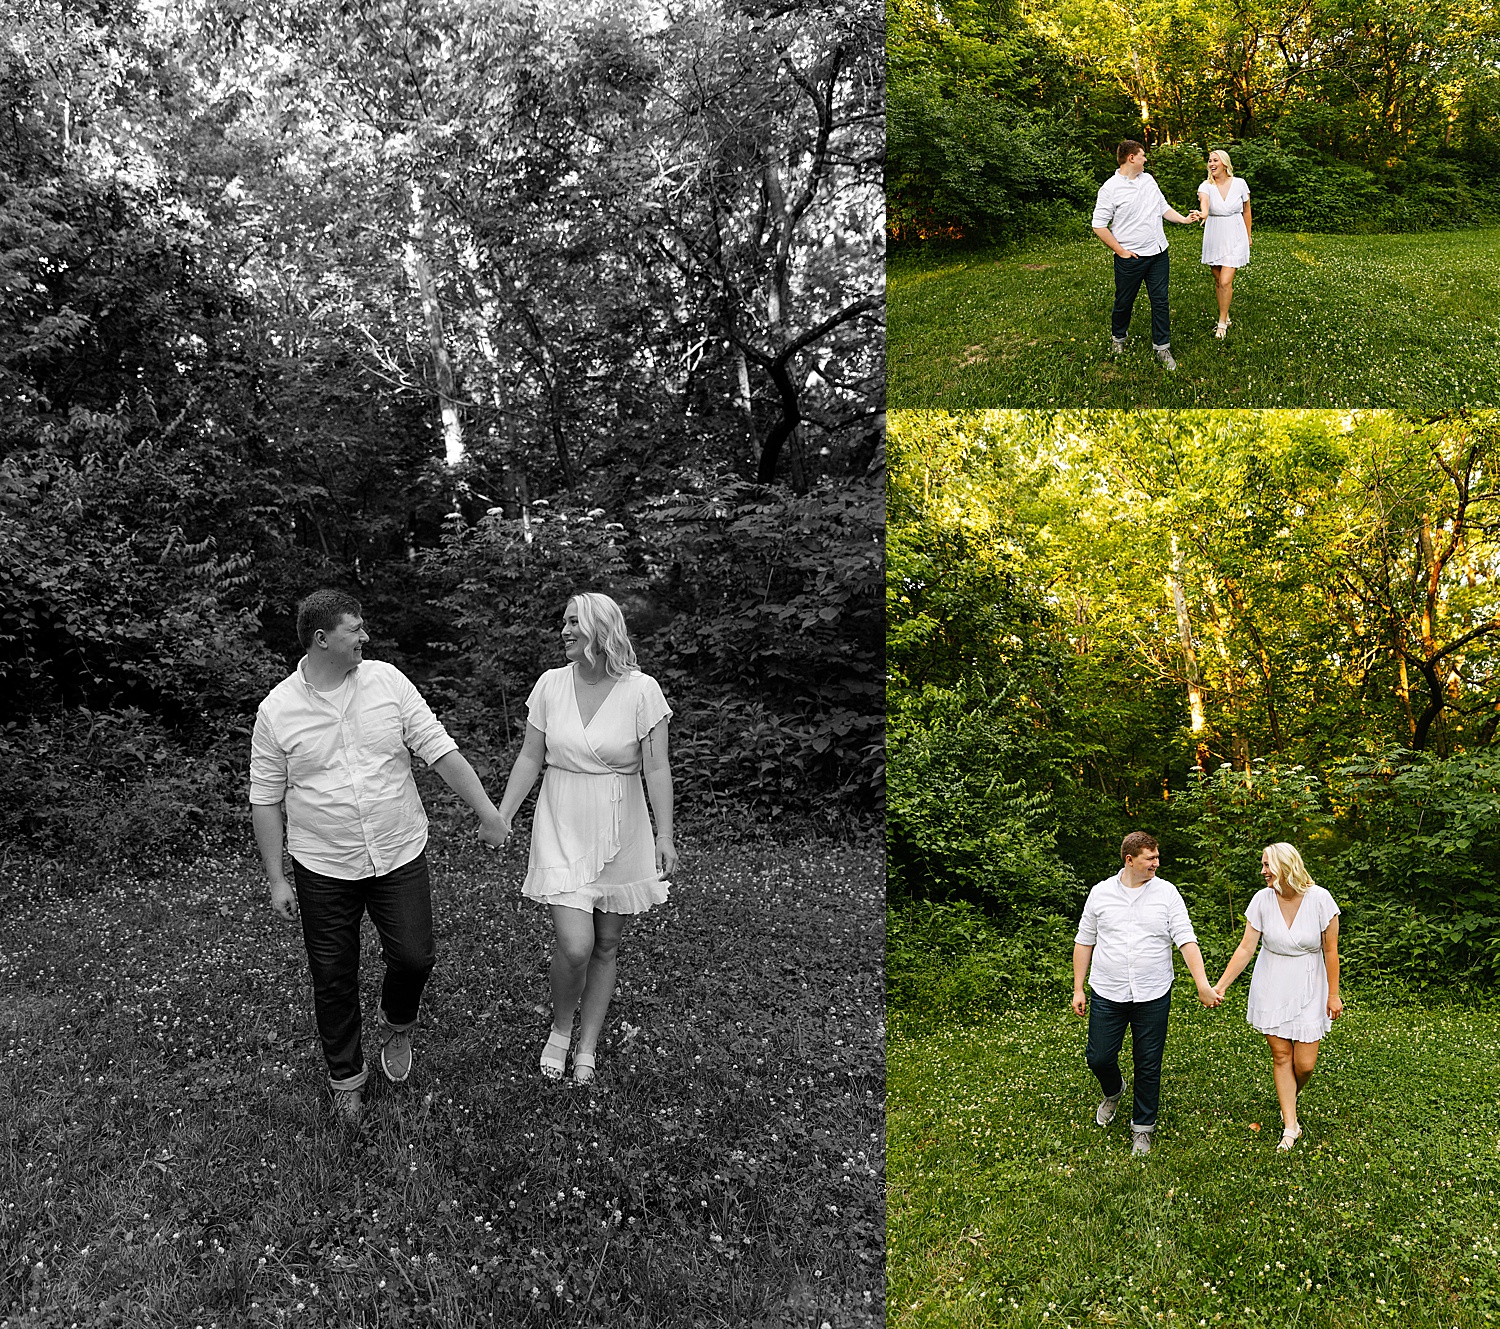 Newly engaged couple holding hands wearing white apparel with short nude heels and bluejeans